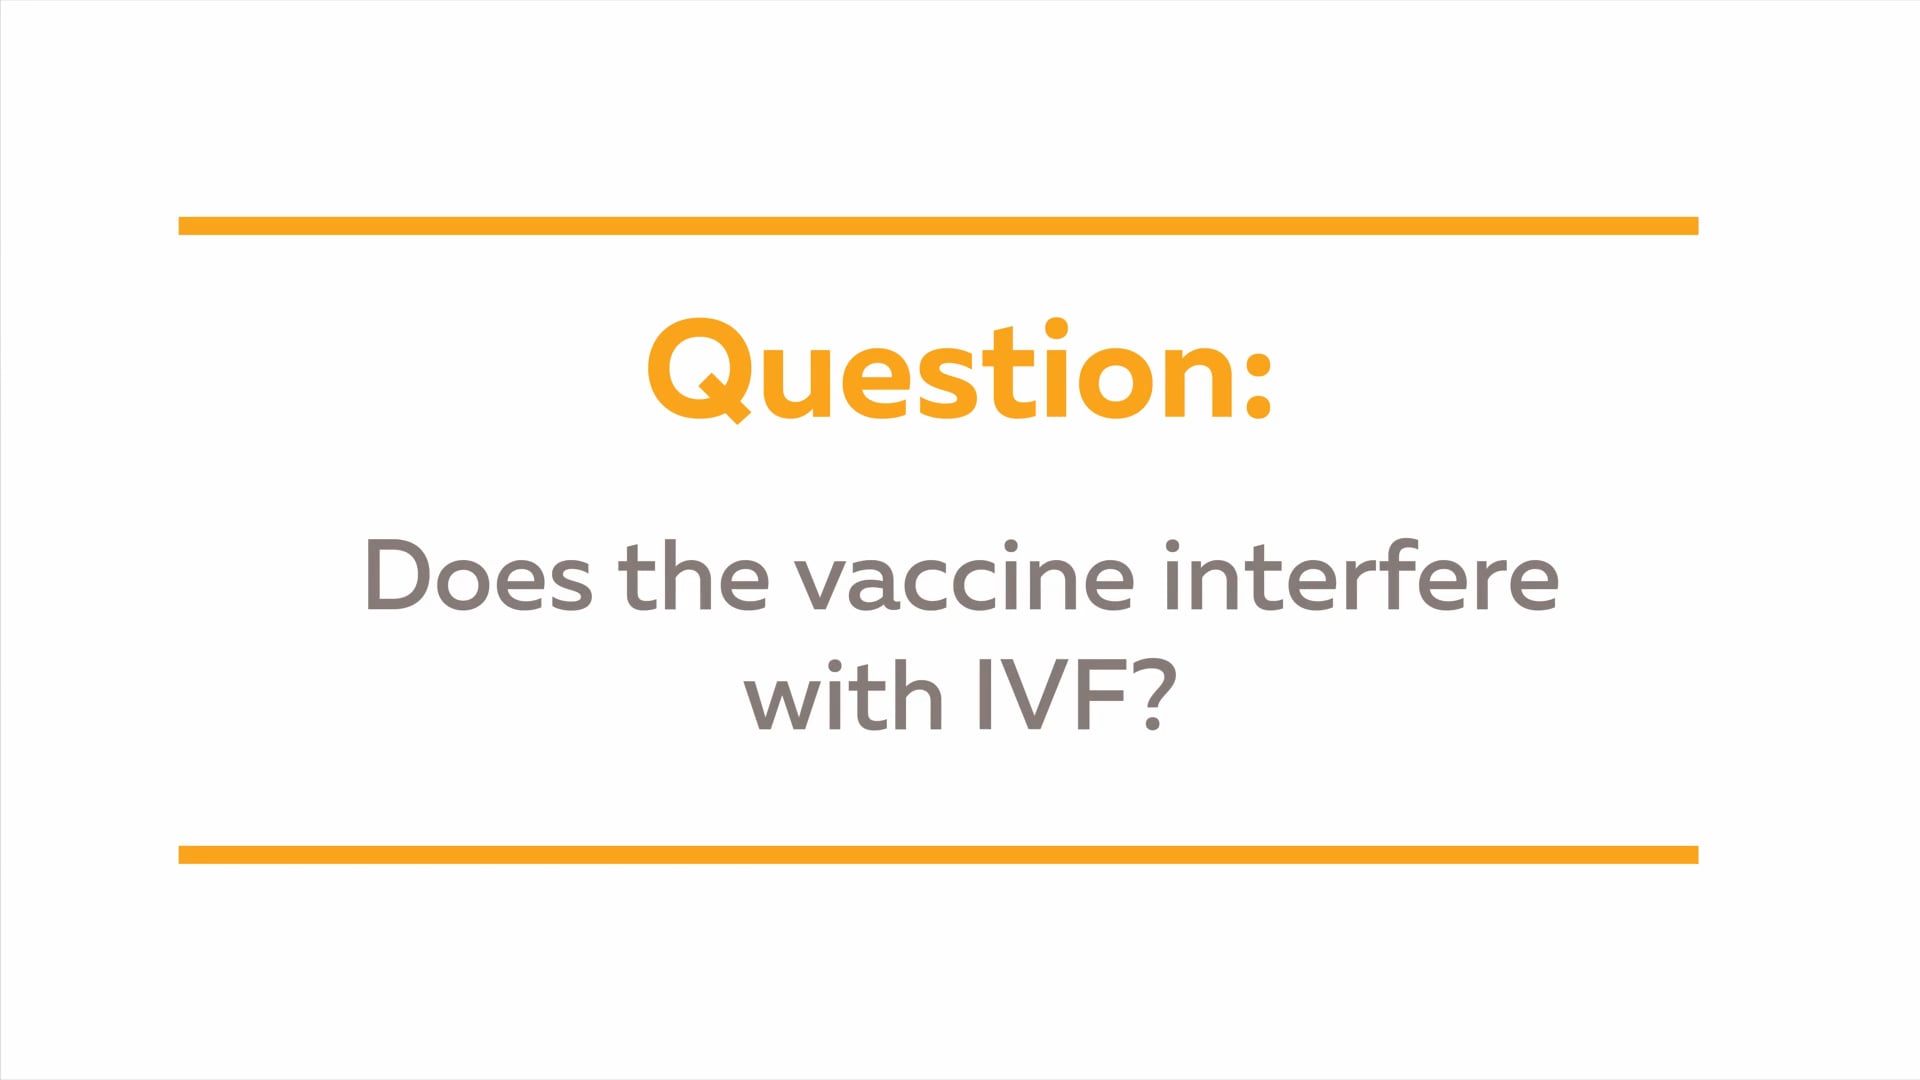 Vaccine Q&A: Does the vaccine interfere with IVF?